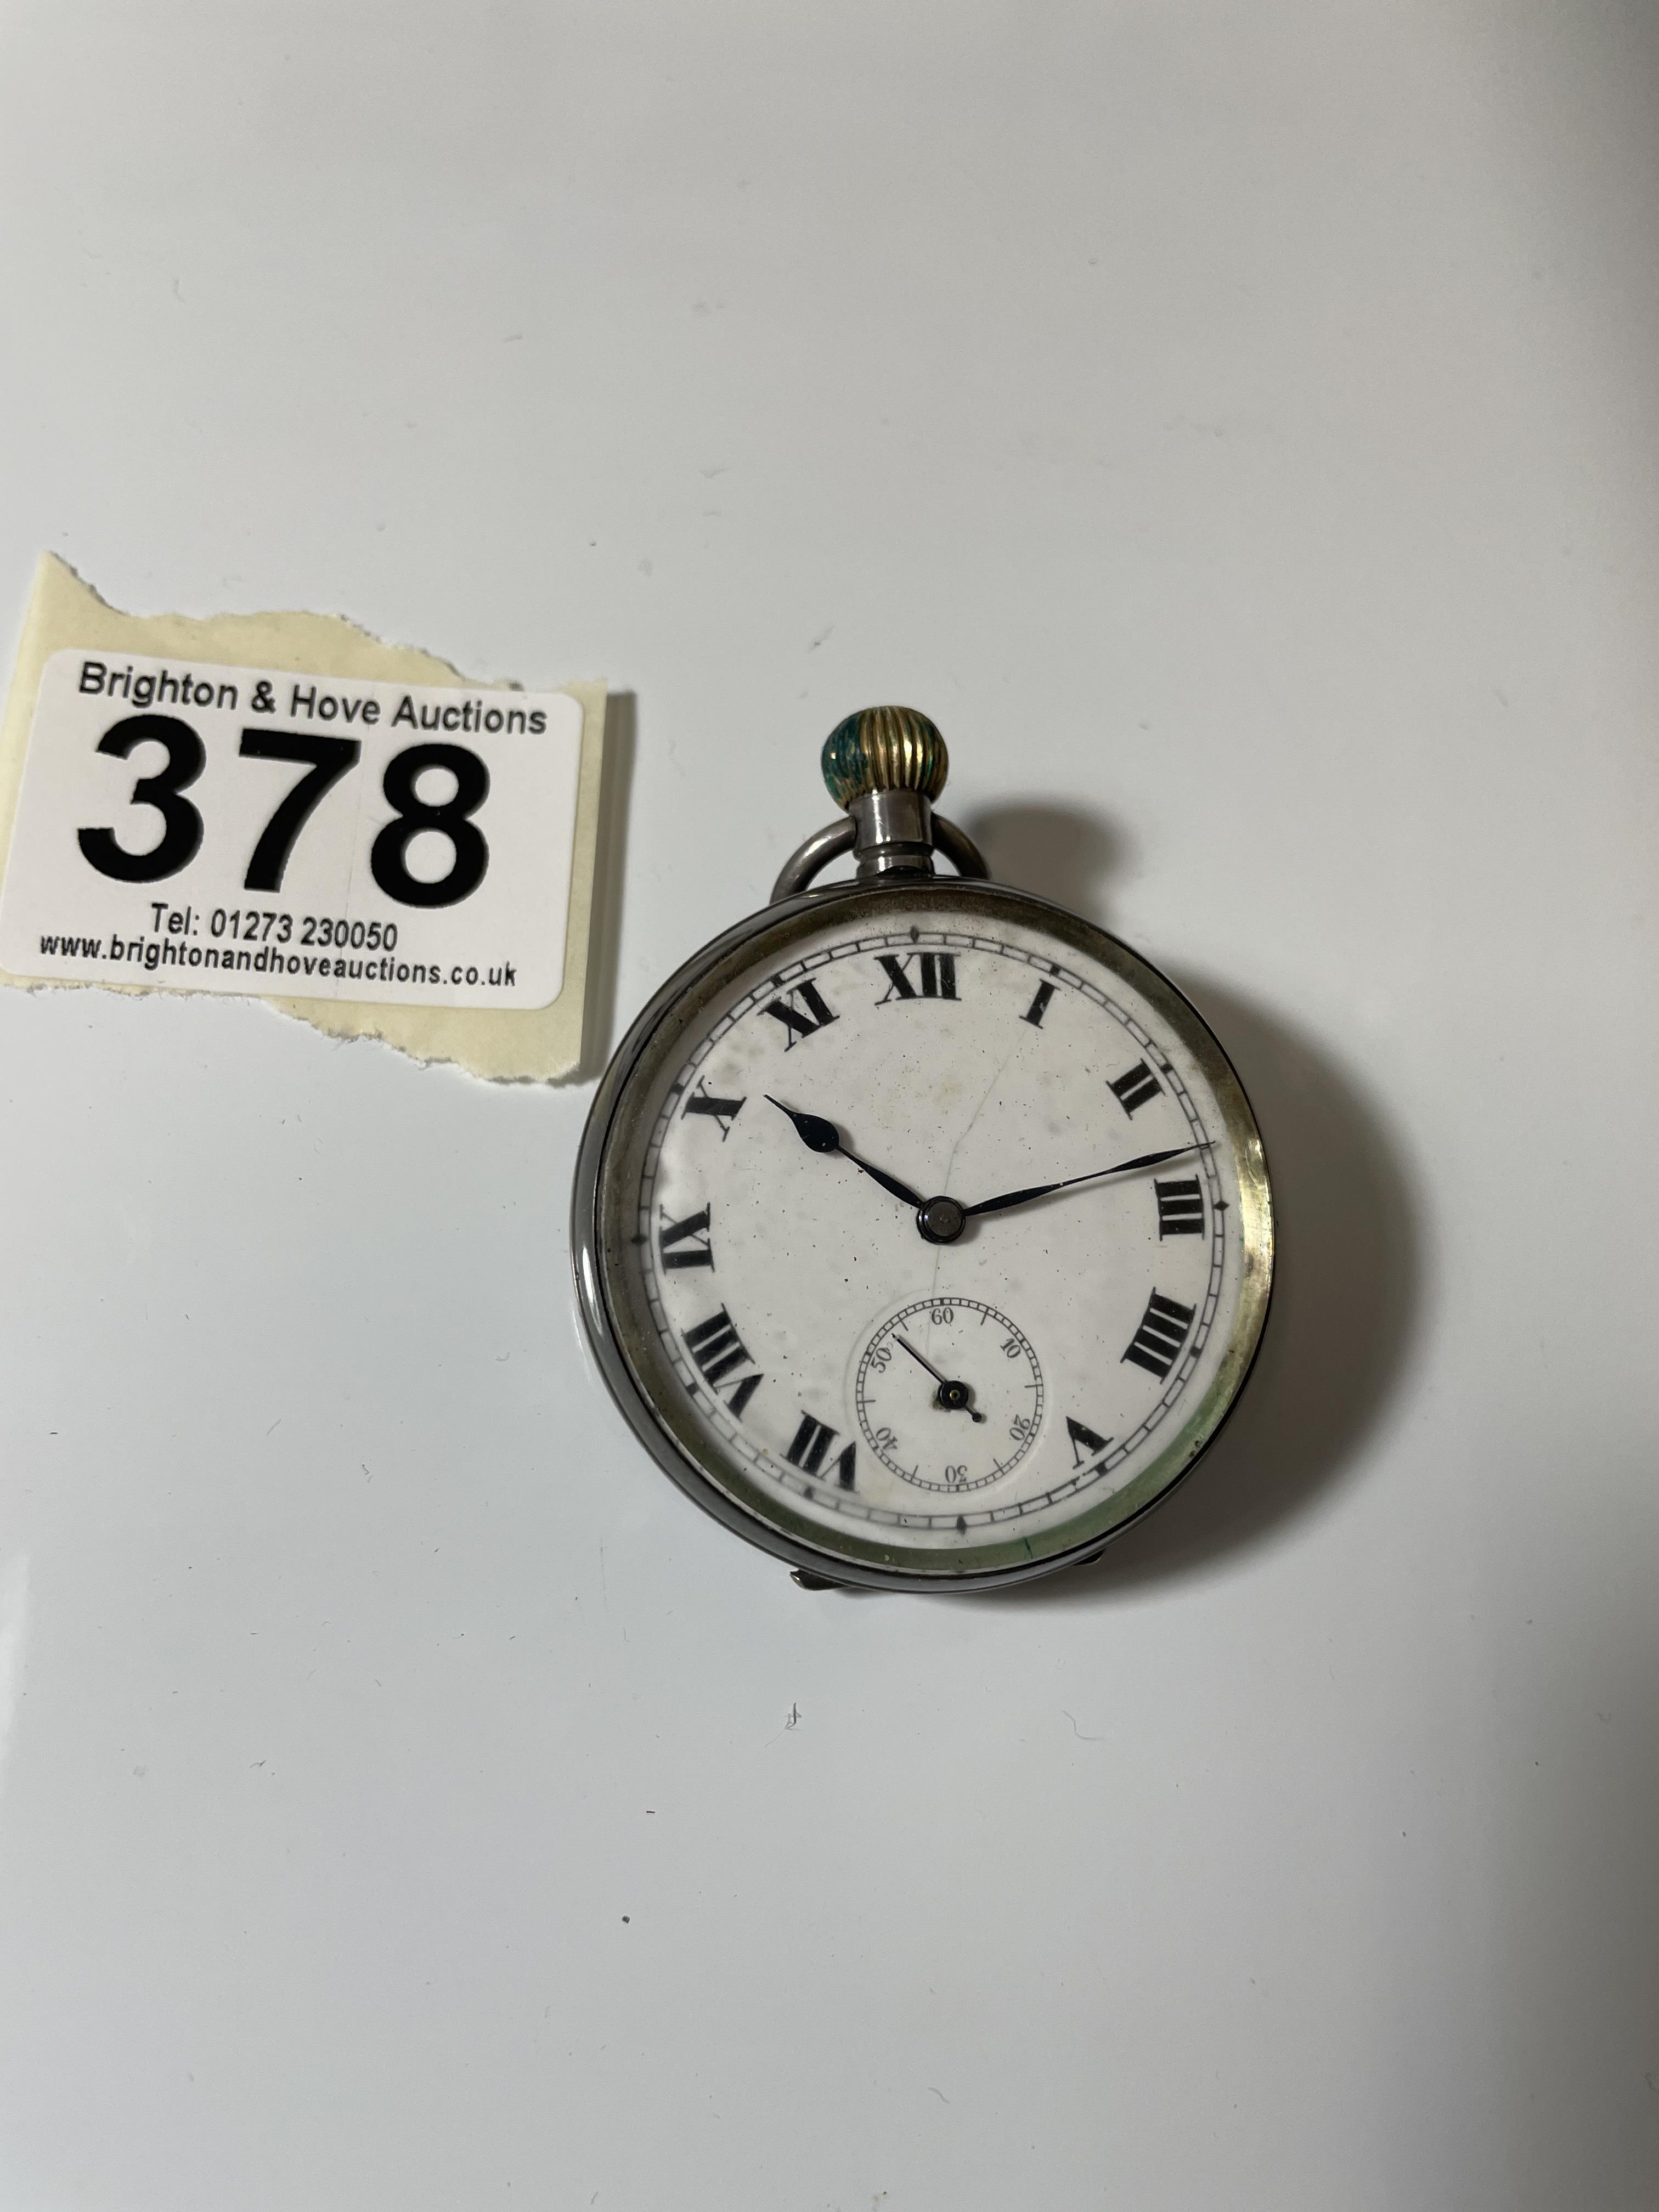 925 SILVER ENGINE TURNED POCKET WATCH WITH SUBSIDIARY SECONDS DIAL.